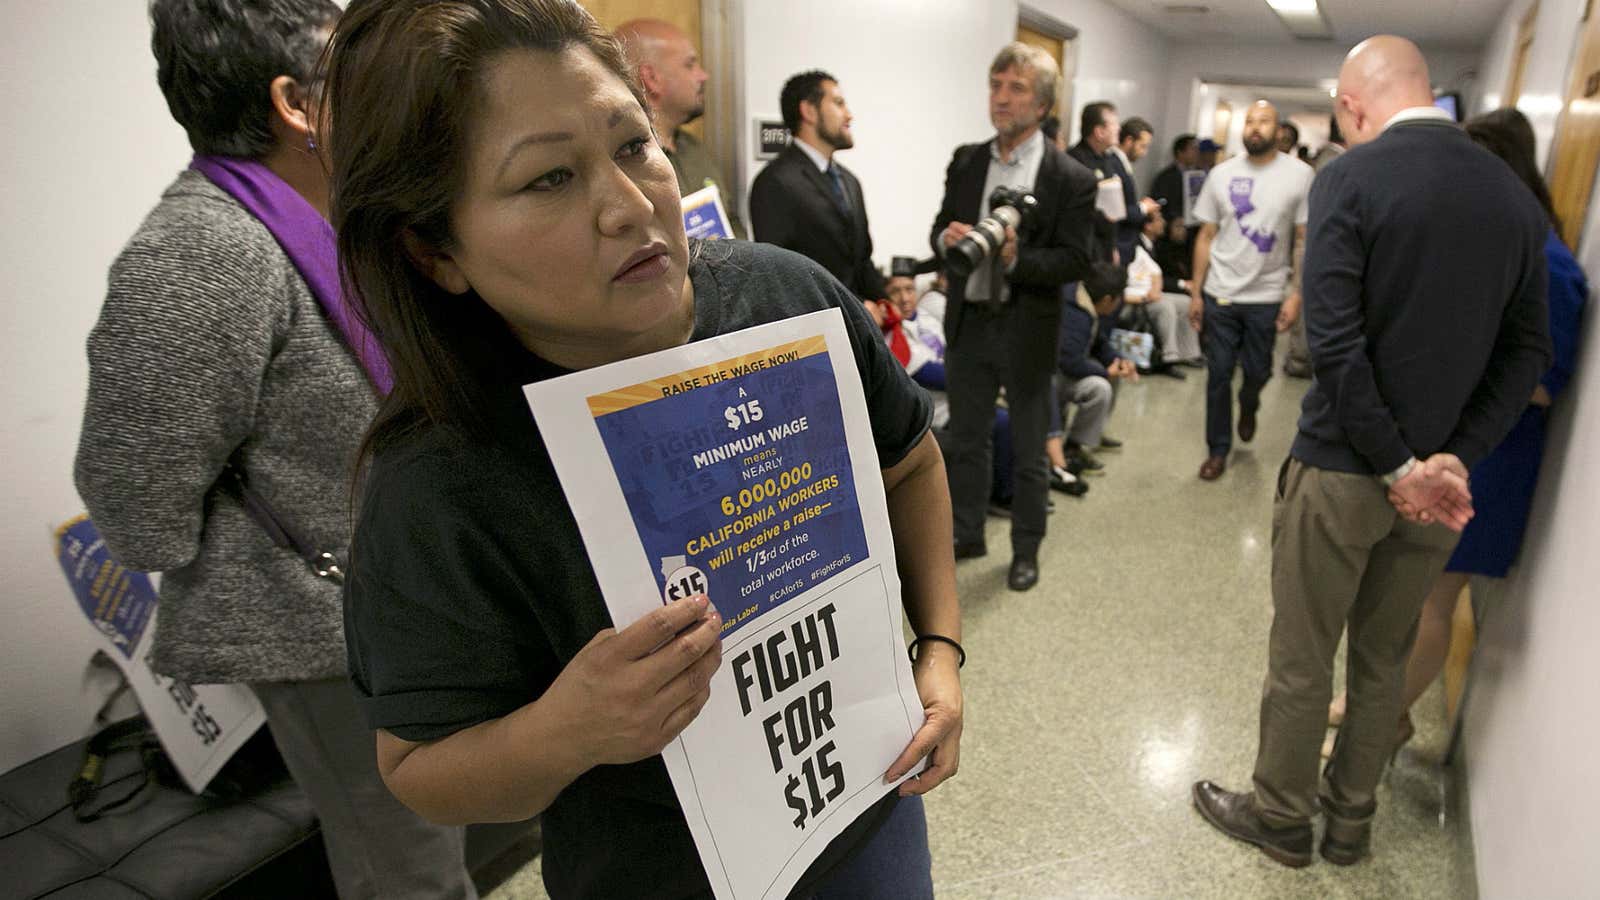 Union workers in many cities are being shut out of the new minimum wage—at unions’ request.